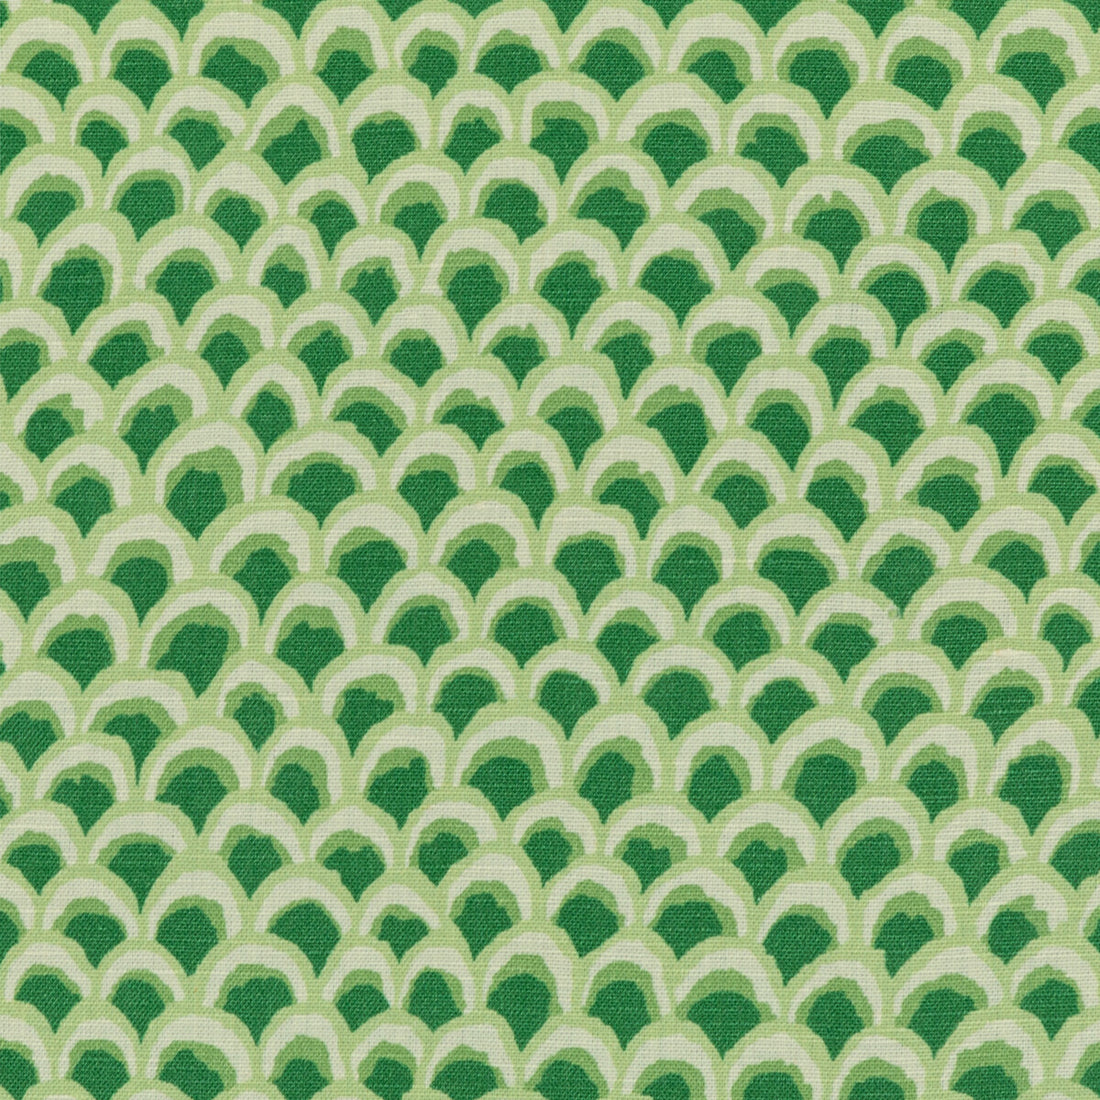 Pave II Print fabric in green color - pattern 8020126.3.0 - by Brunschwig &amp; Fils in the Louverne collection